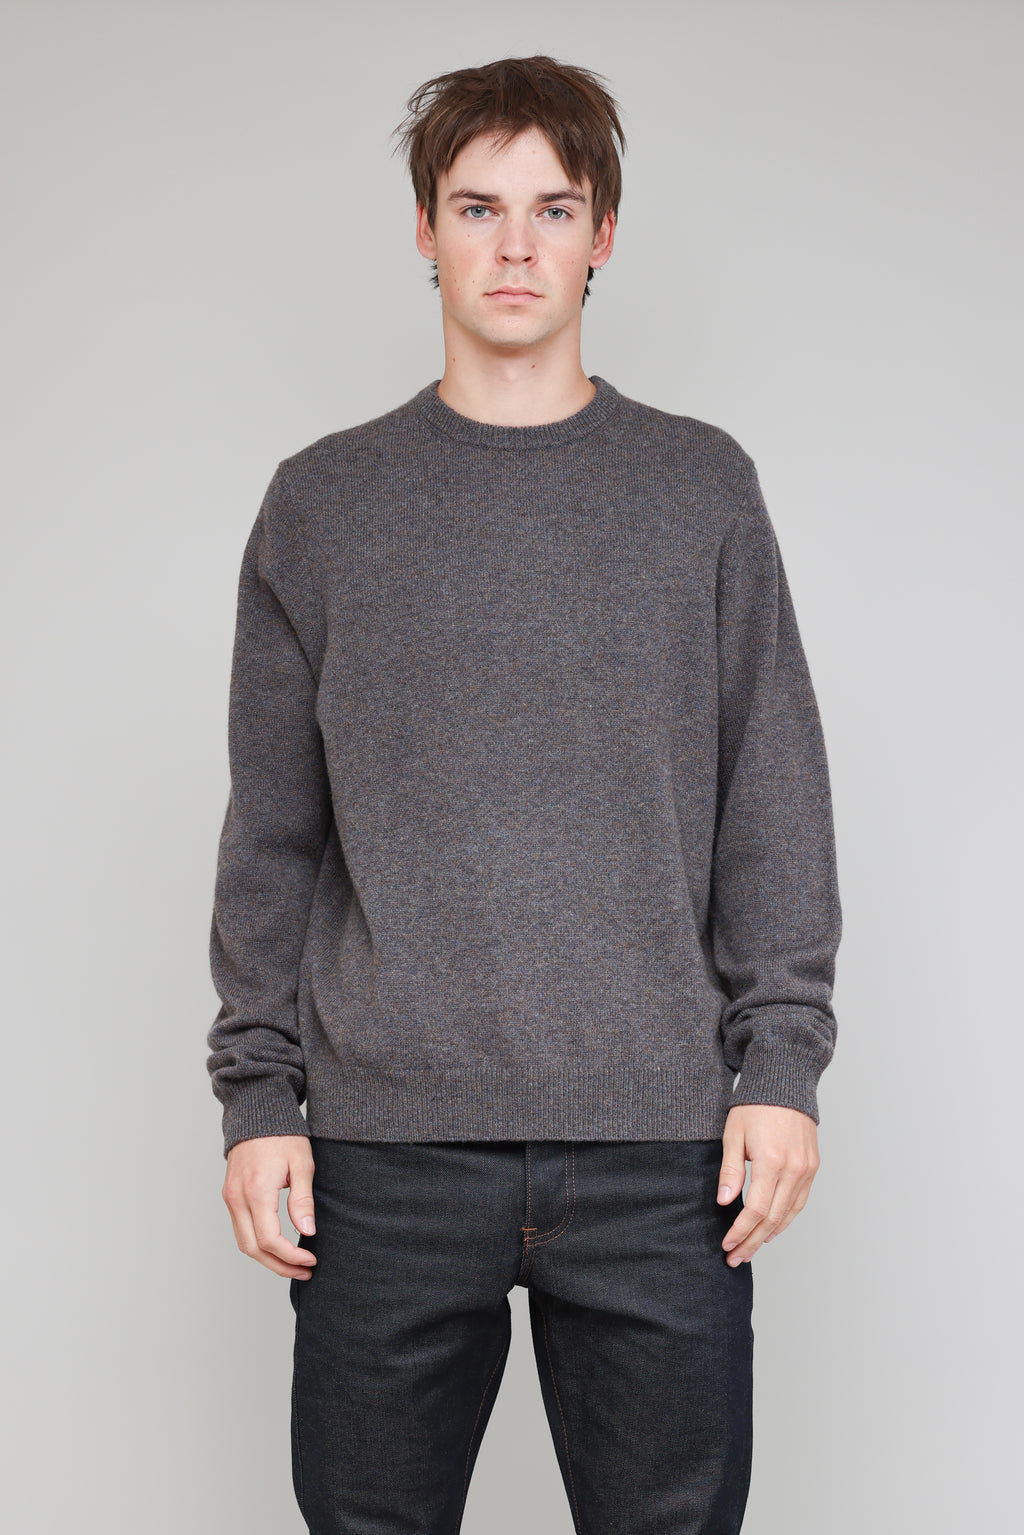 NS3018-20 New Wool Crew Neck in Melange Fossil 1